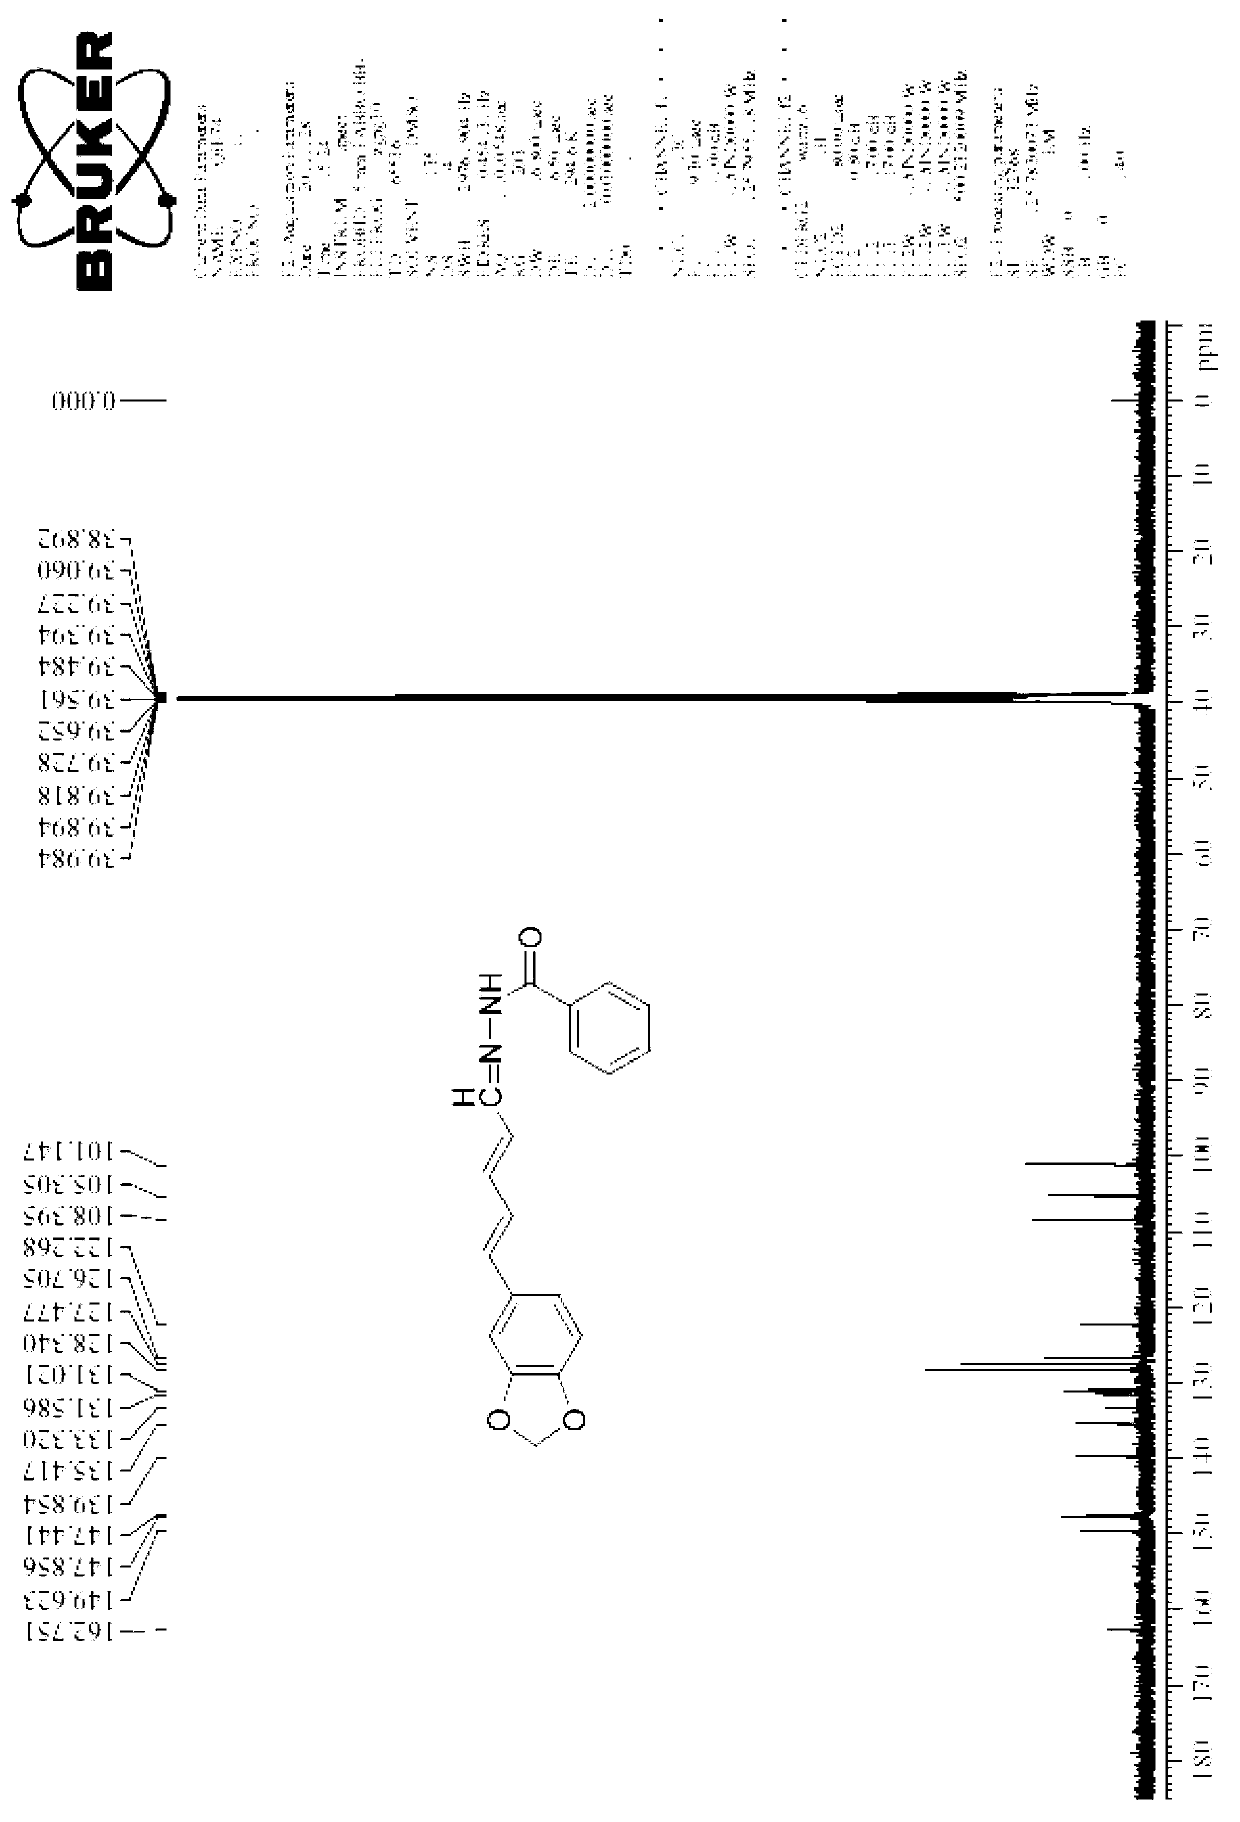 Piperine hydrazone or acylhydrazone or sulfonyl hydrazone derivative substances and application for preparing a botanical insecticide